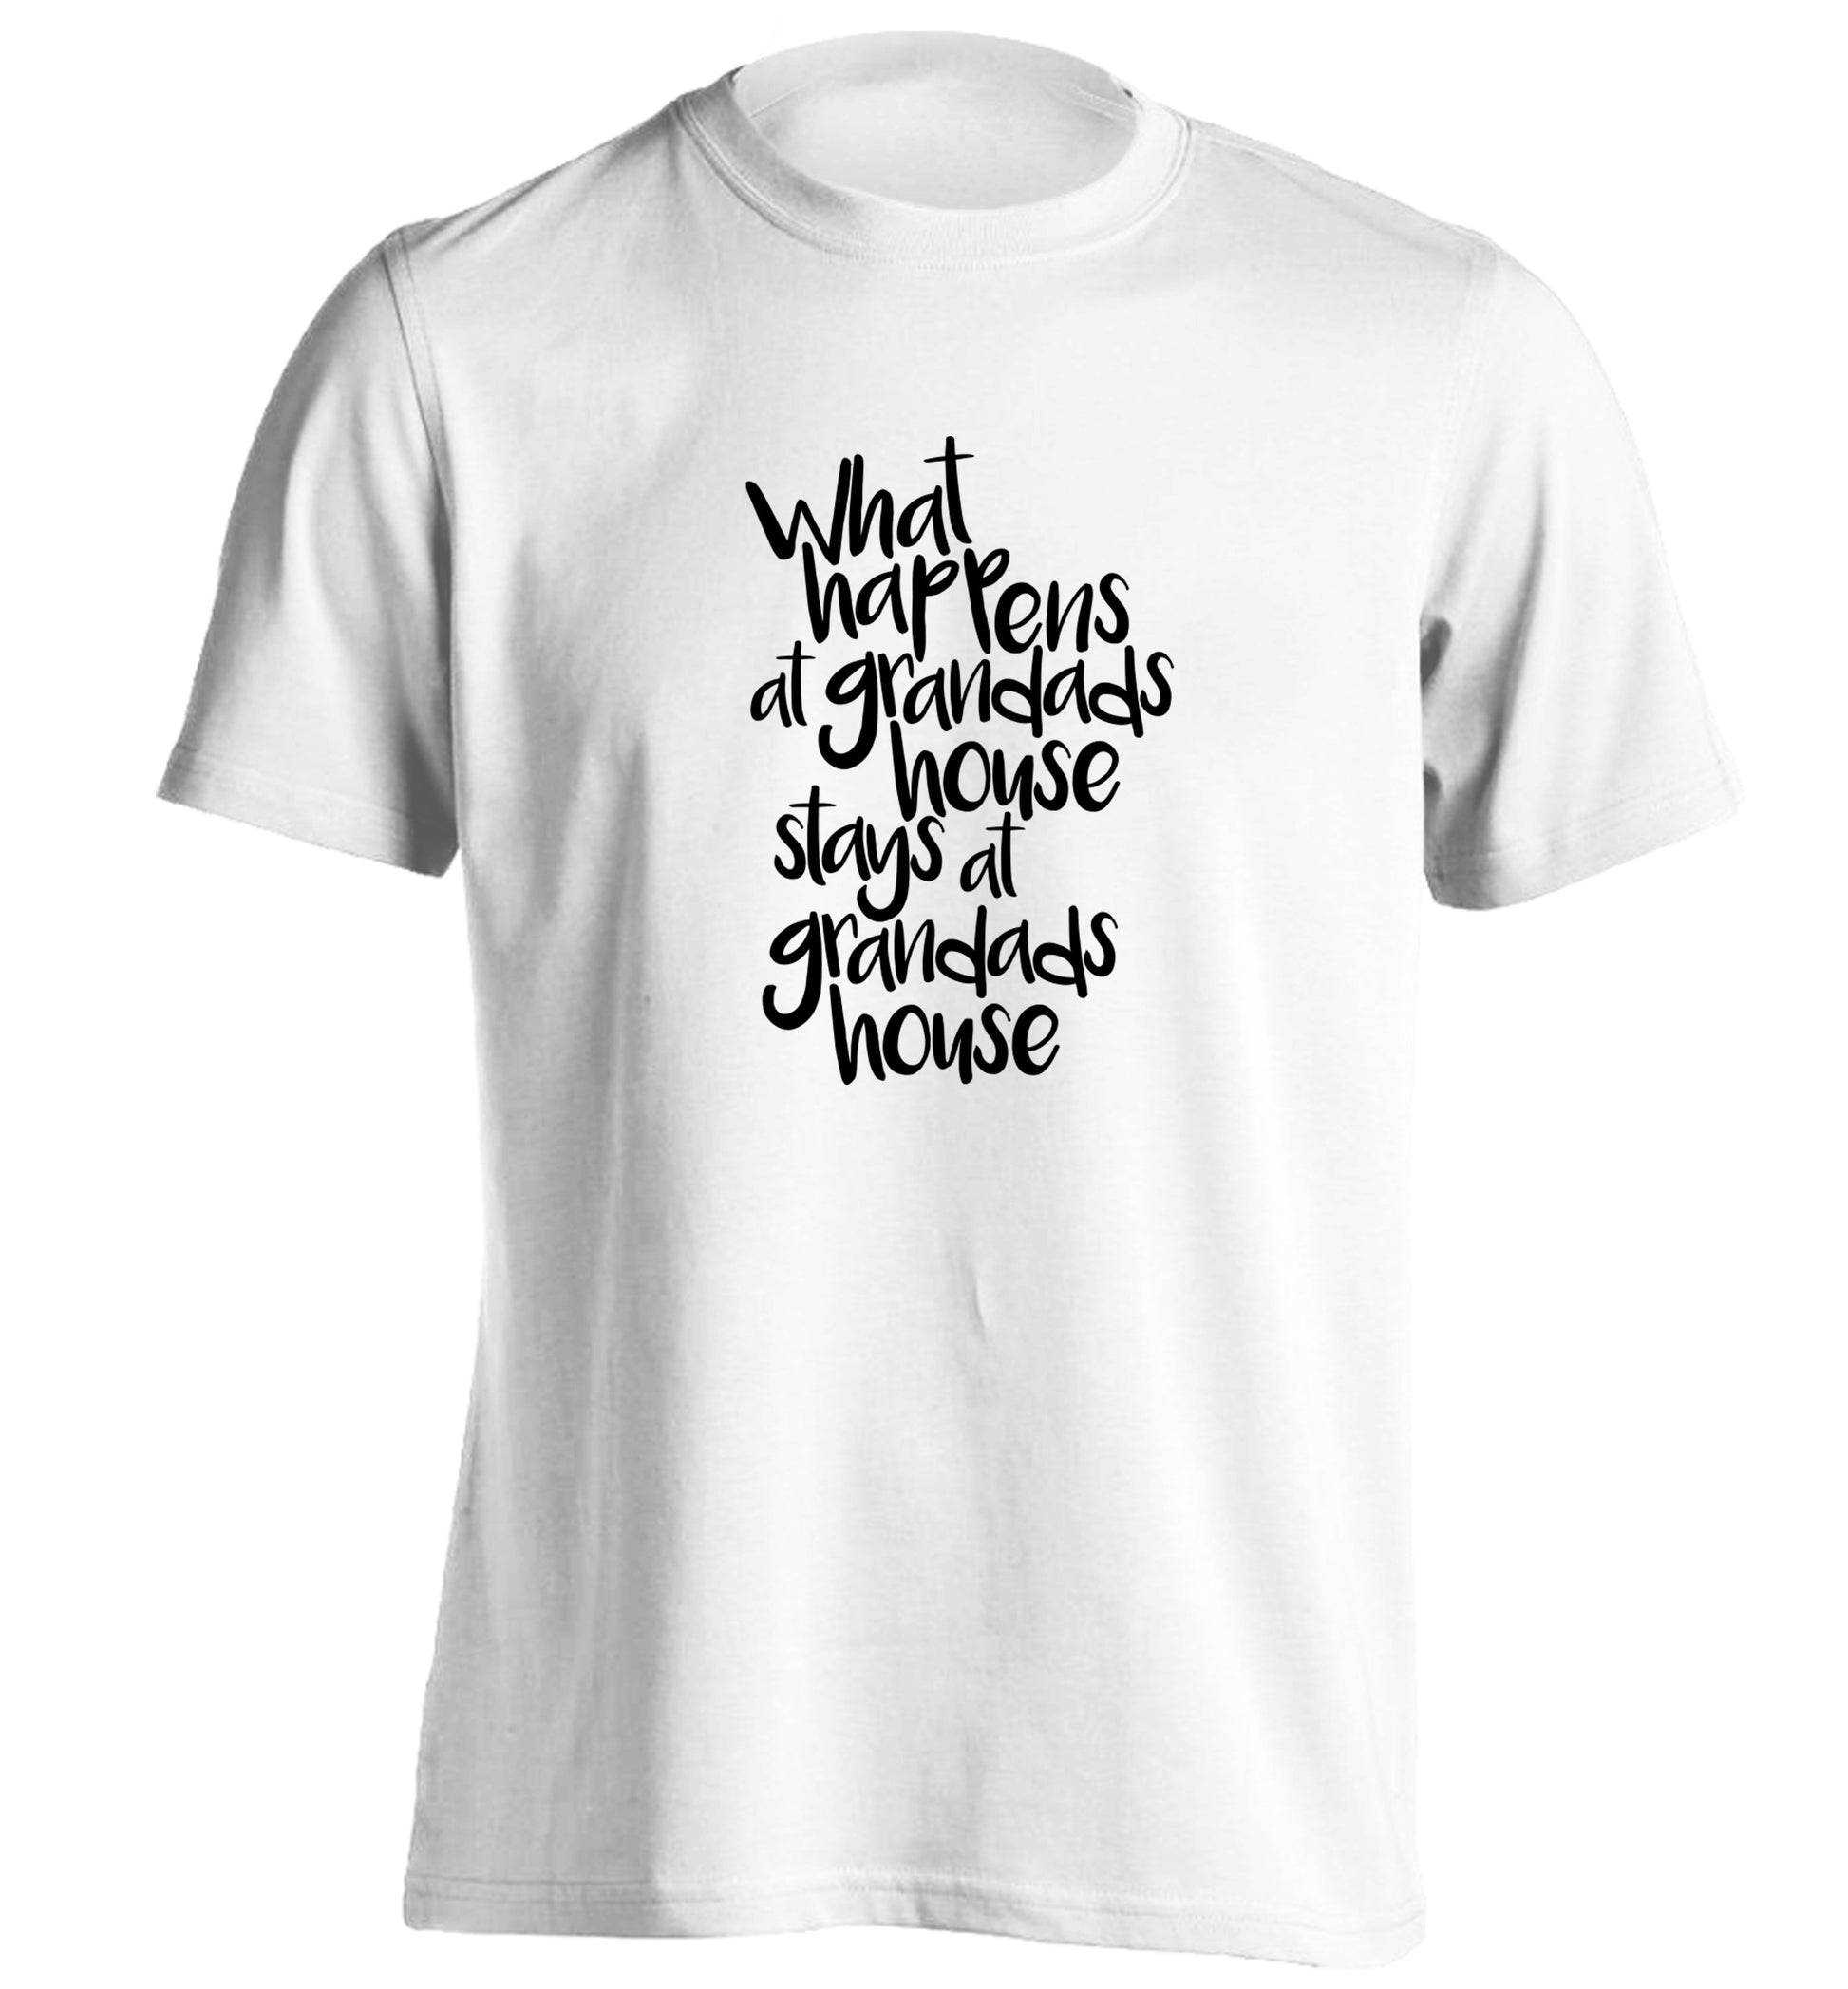 What happens at grandads house stays at grandads house adults unisex white Tshirt 2XL